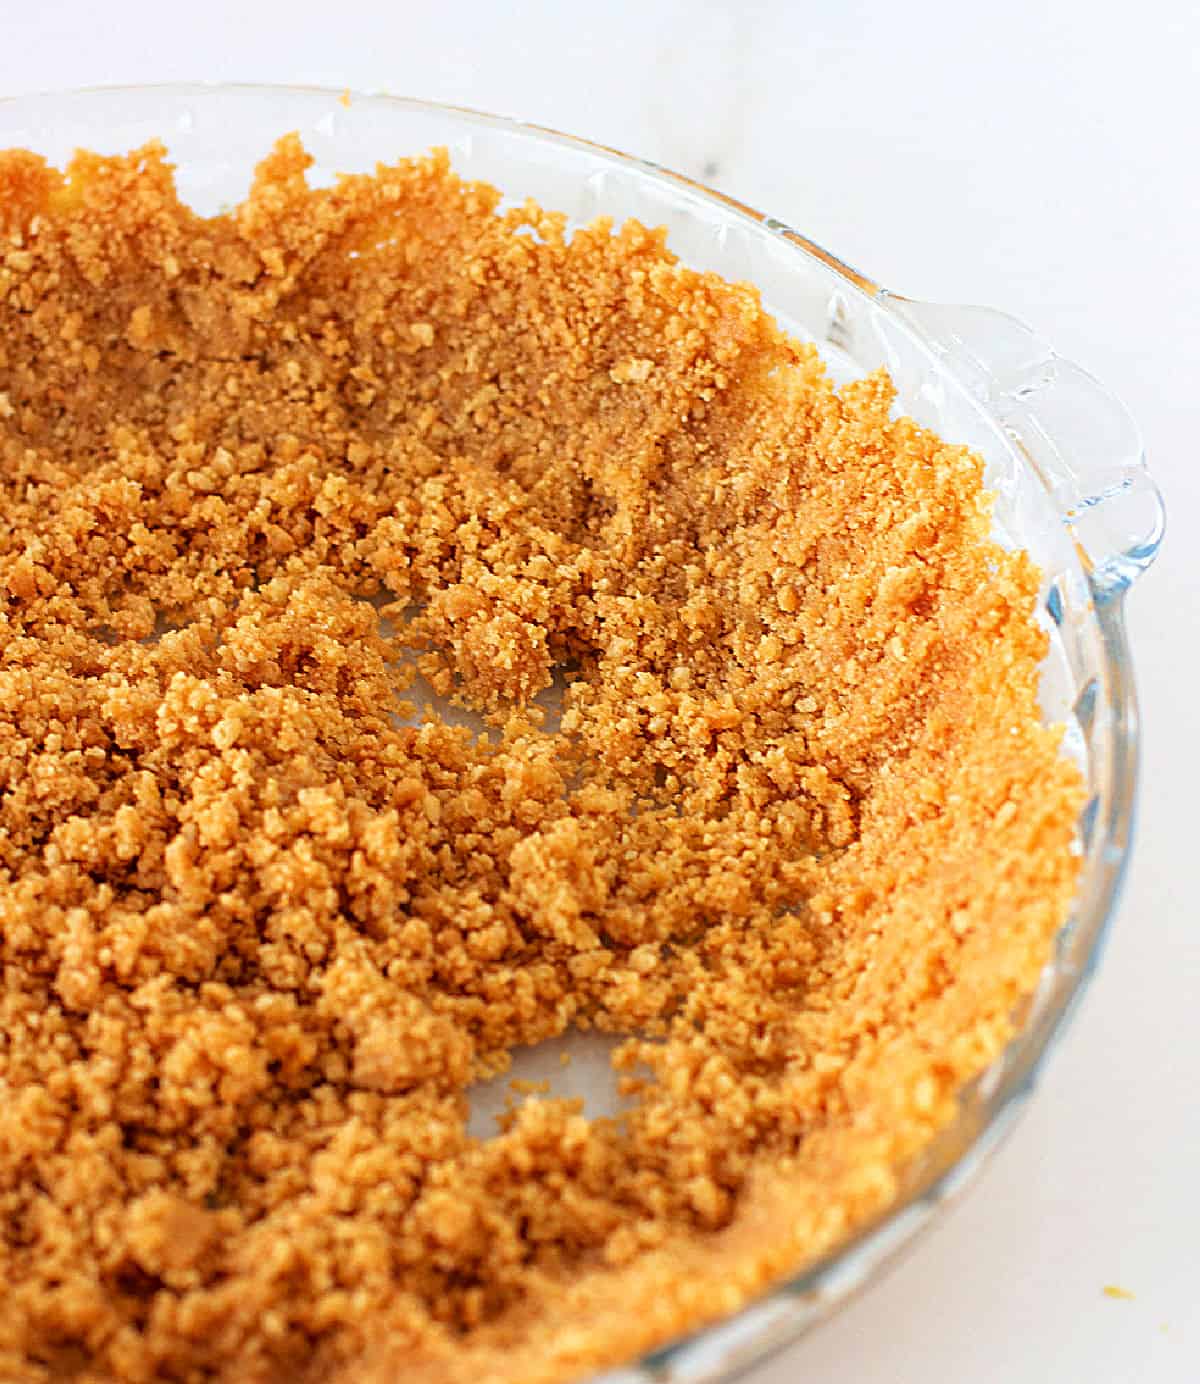 Graham cracker cookie crust being patted in a glass pie dish, white surface